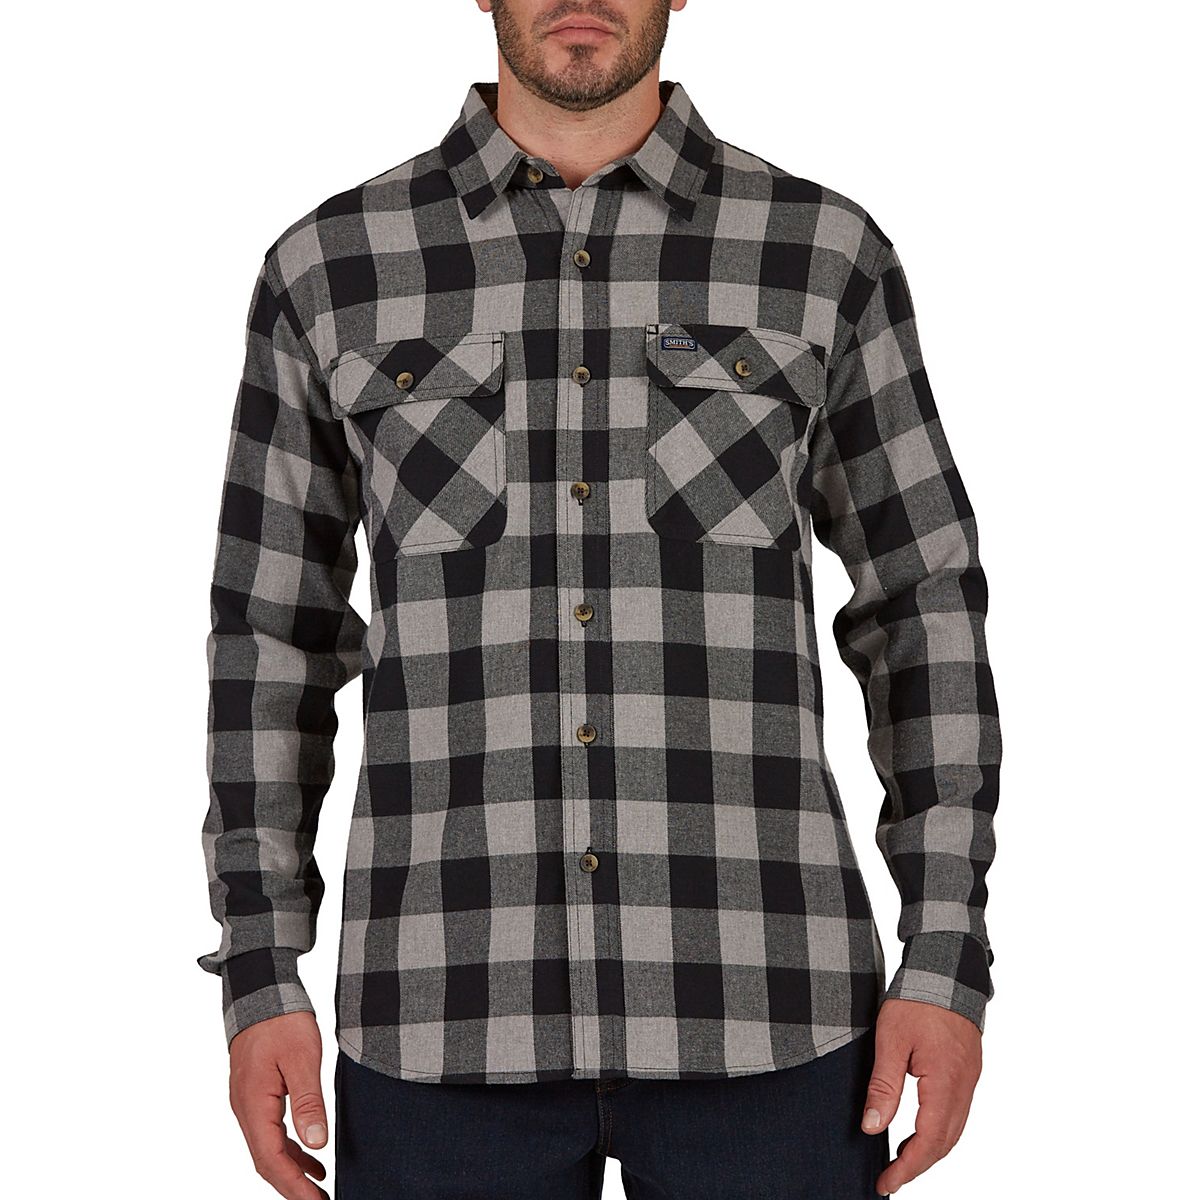 Smiths Workwear Mens Double Brushed Flannel Shirt BEST PRICE GUARANTEE ...